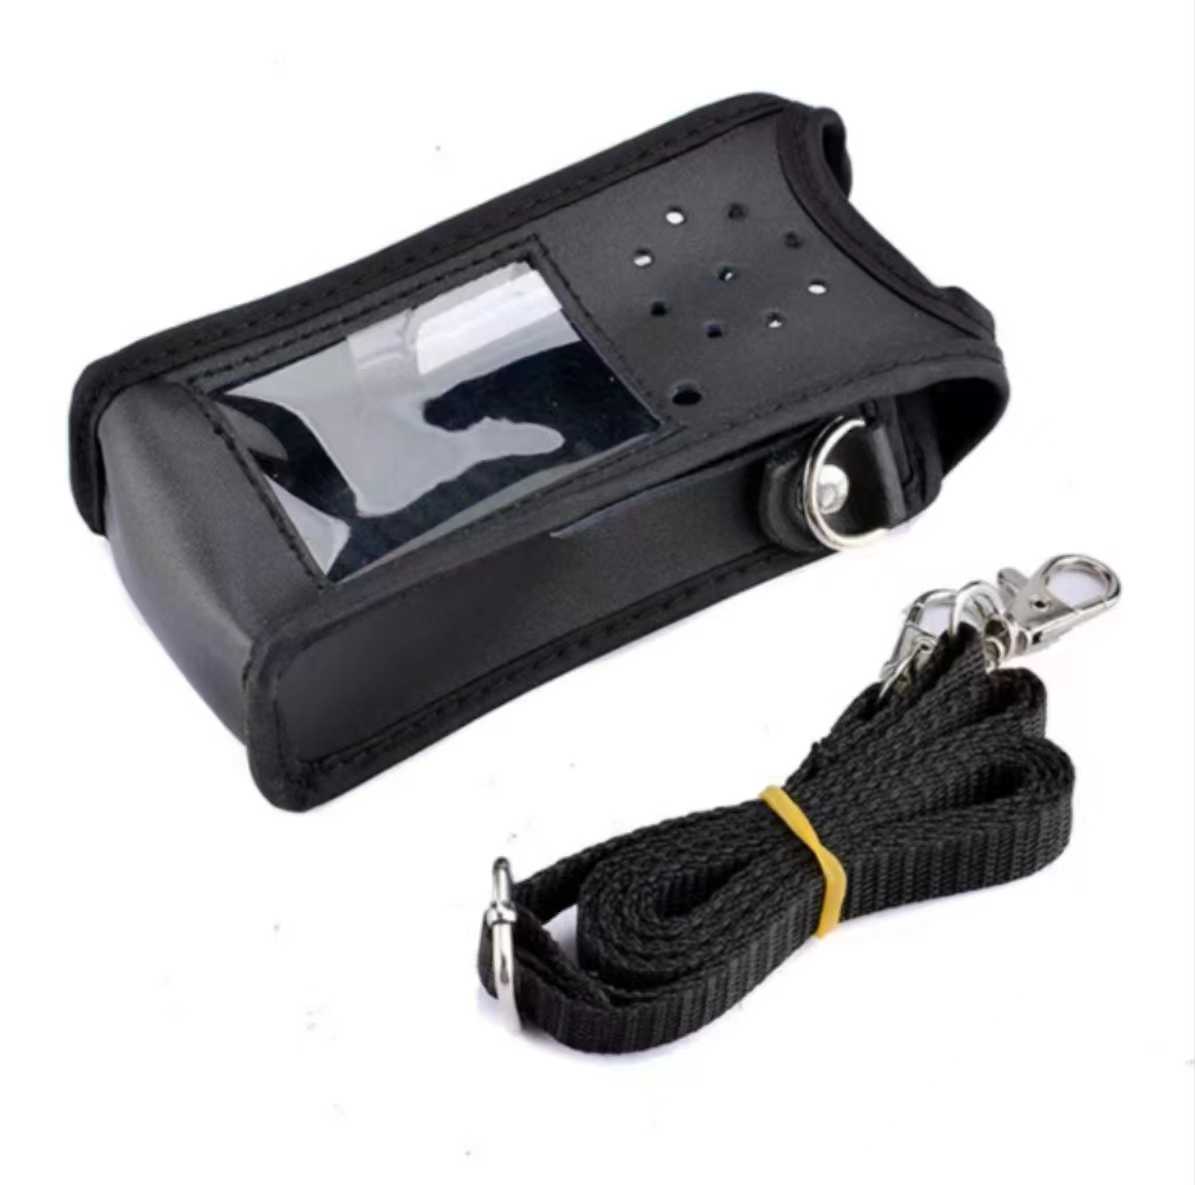 Transceiver protection &amp; carrying case for 5R - Baofeng - 181070